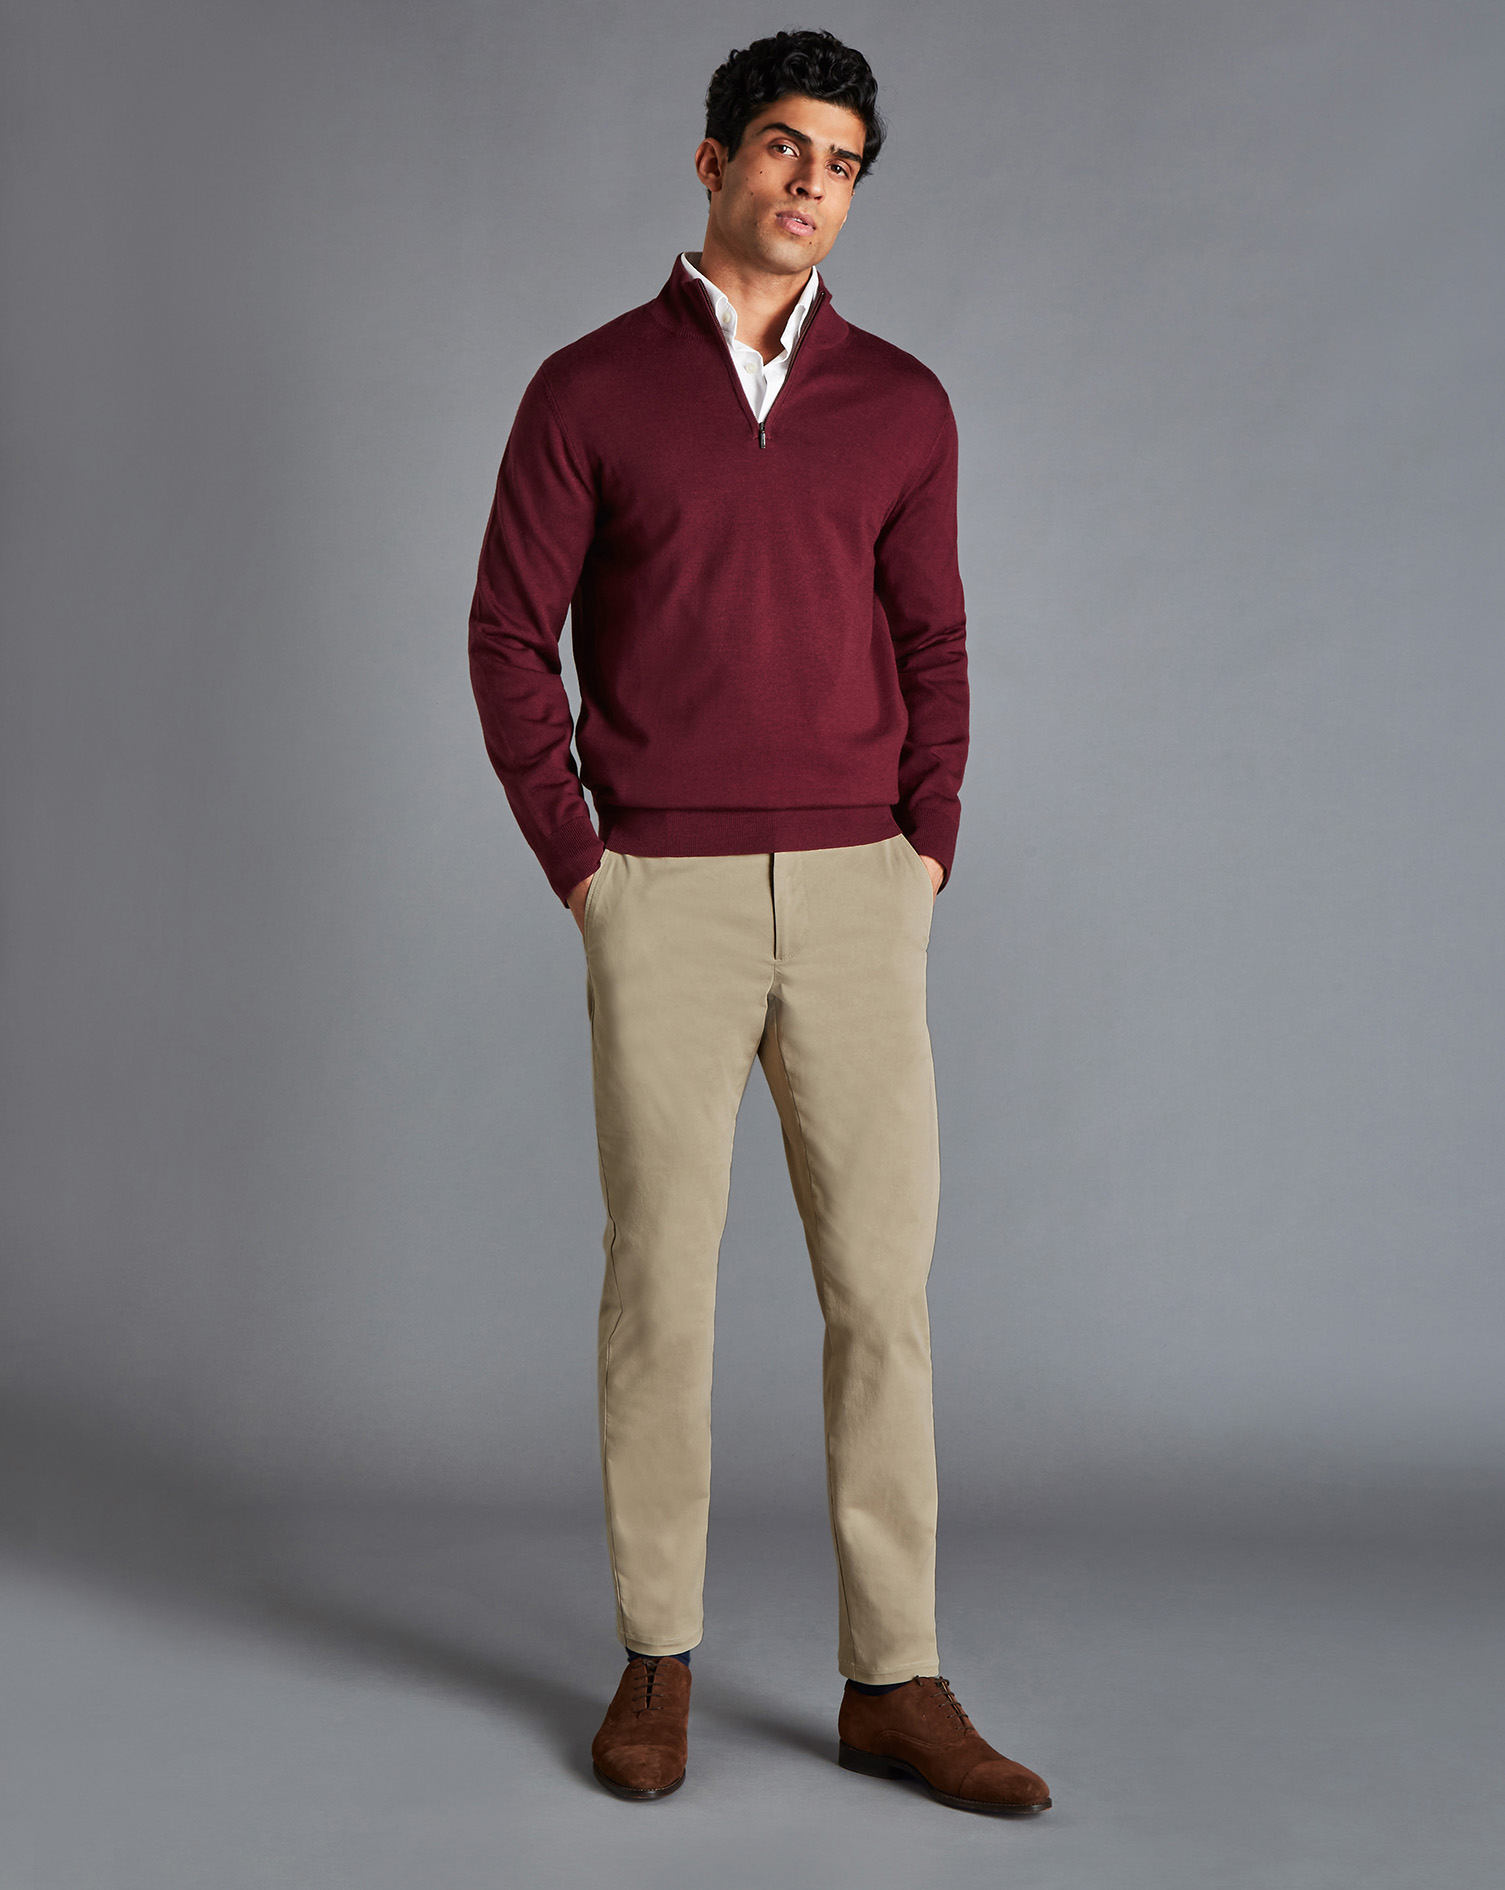 Golf Clothing: Polos, Tops, Jumpers, Trousers, Socks & More | Charles ...